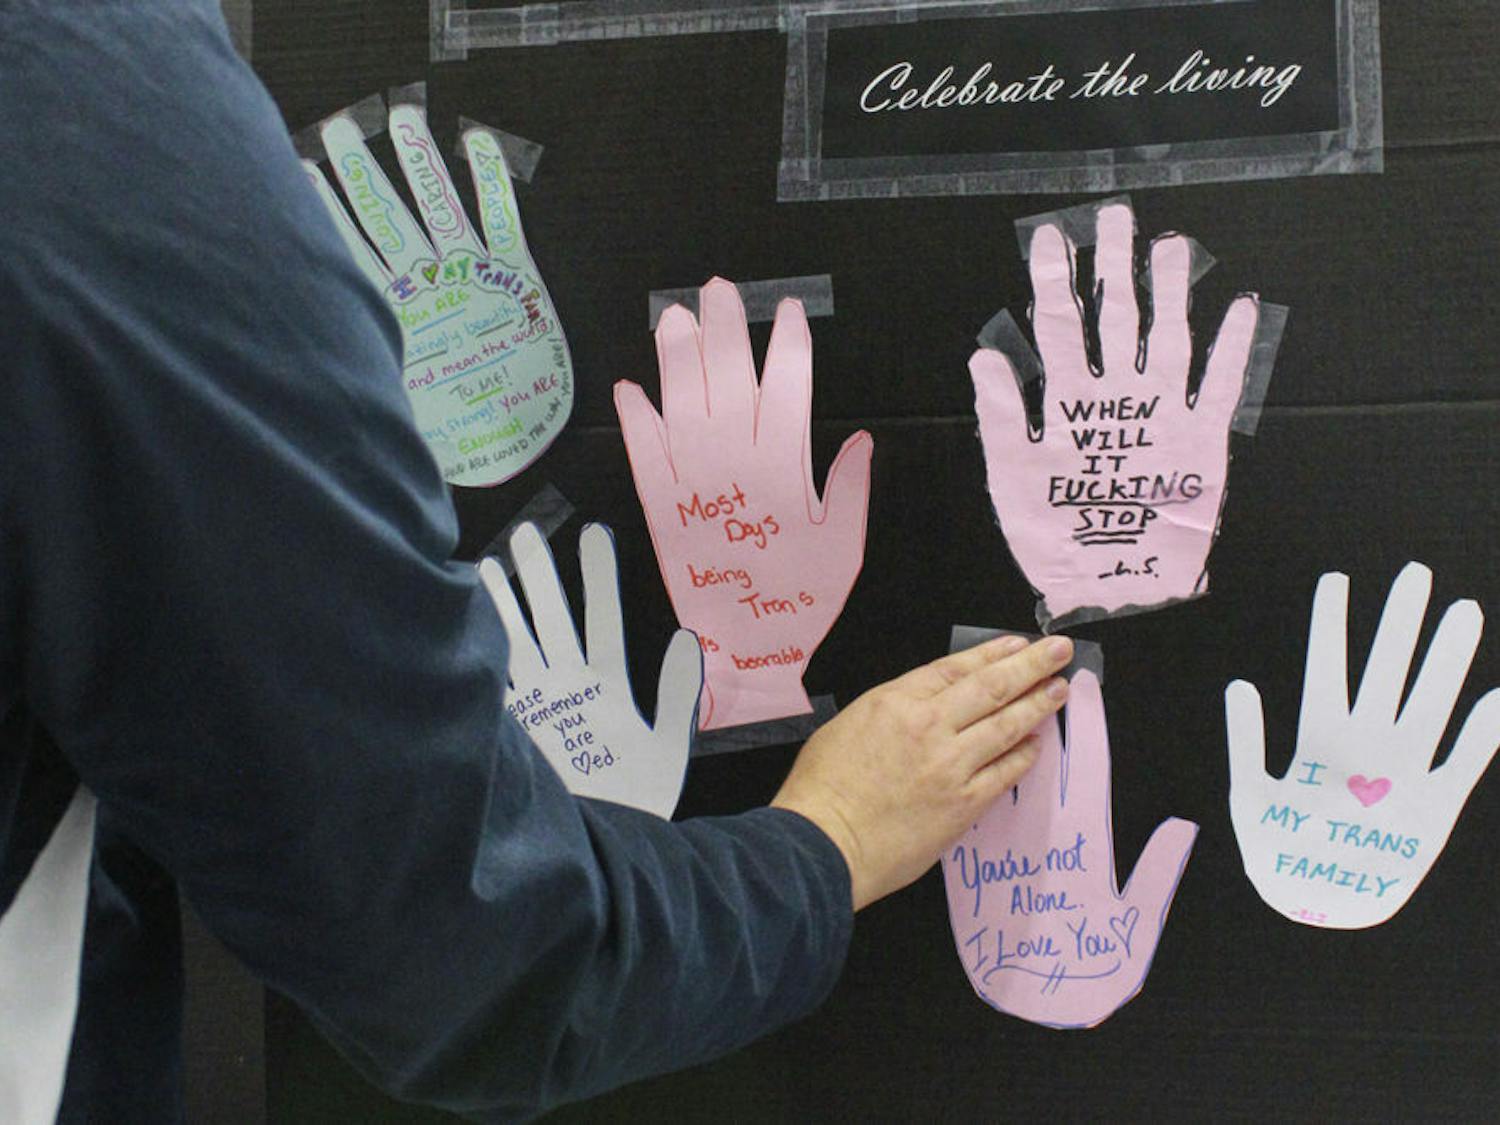 Students posted their white, pink or blue paper handprints with words of rememberance on a board that will be displayed on the Plaza of the Americas Nov. 20, 2015. The colors represent the transgender pride flag.